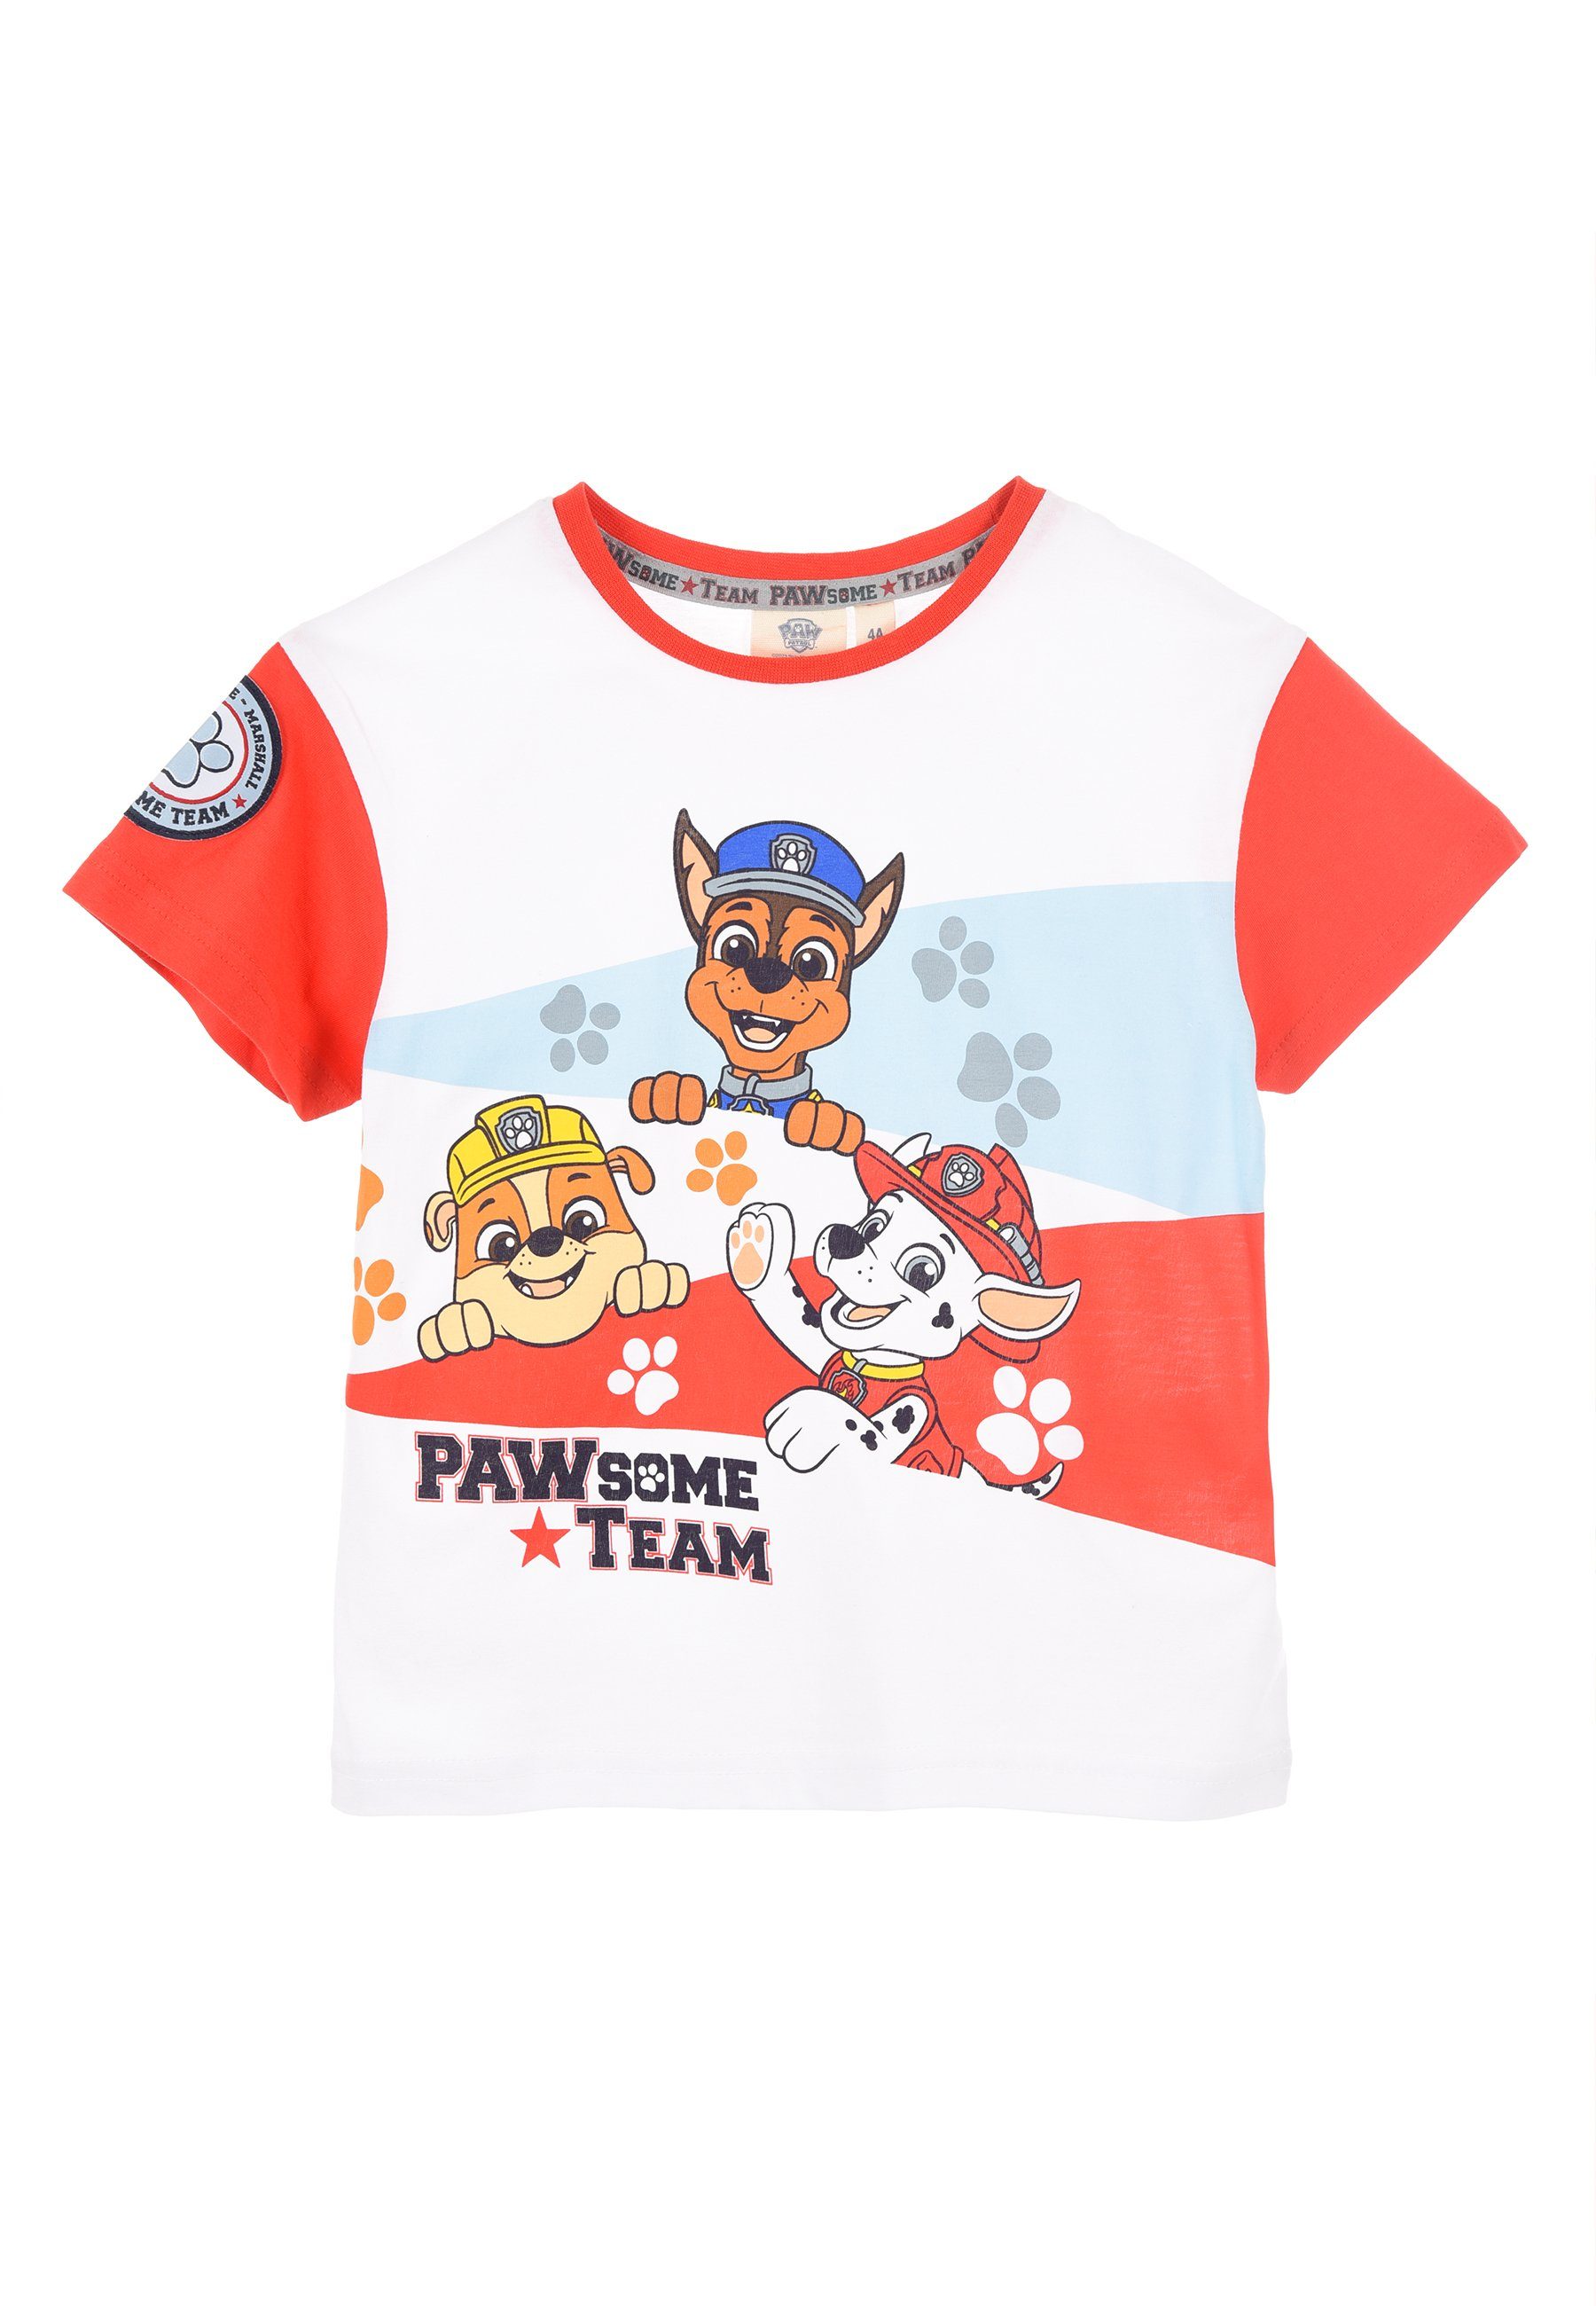 PAW Marshall Oberteil PATROL Chase T-Shirt Kinder Rubble Jungen T-Shirt Rot